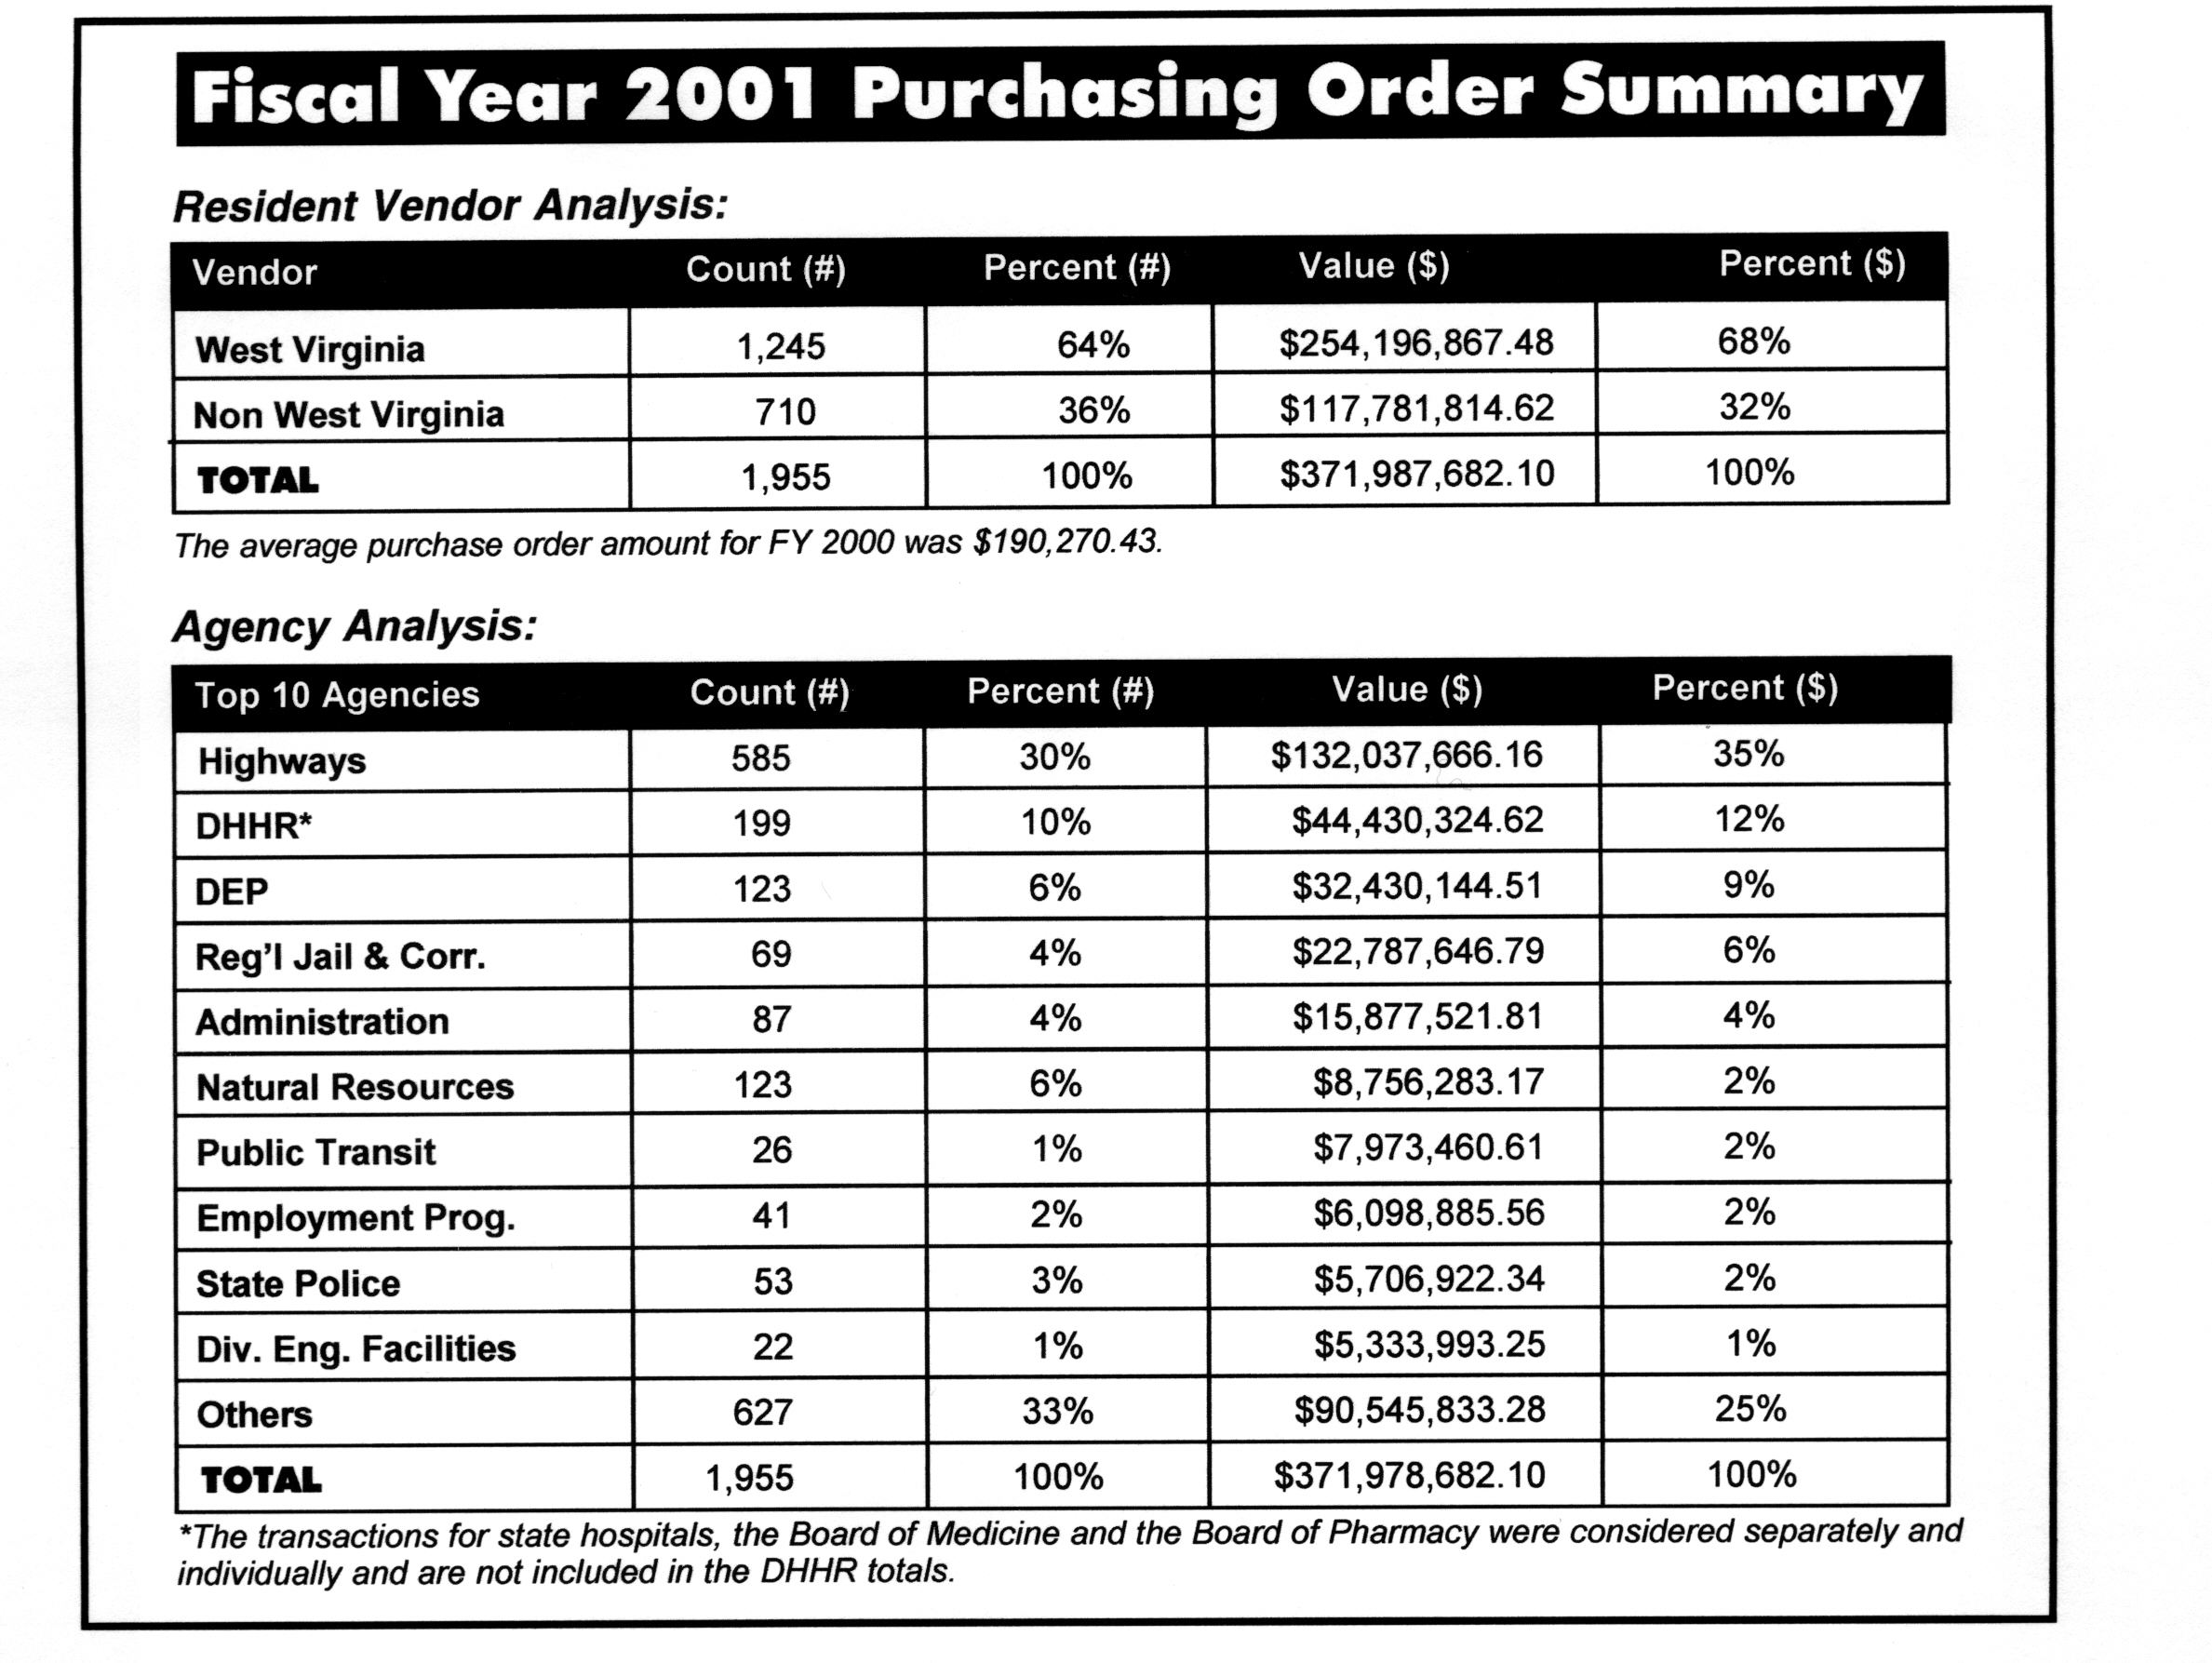 Purchase order summary report example